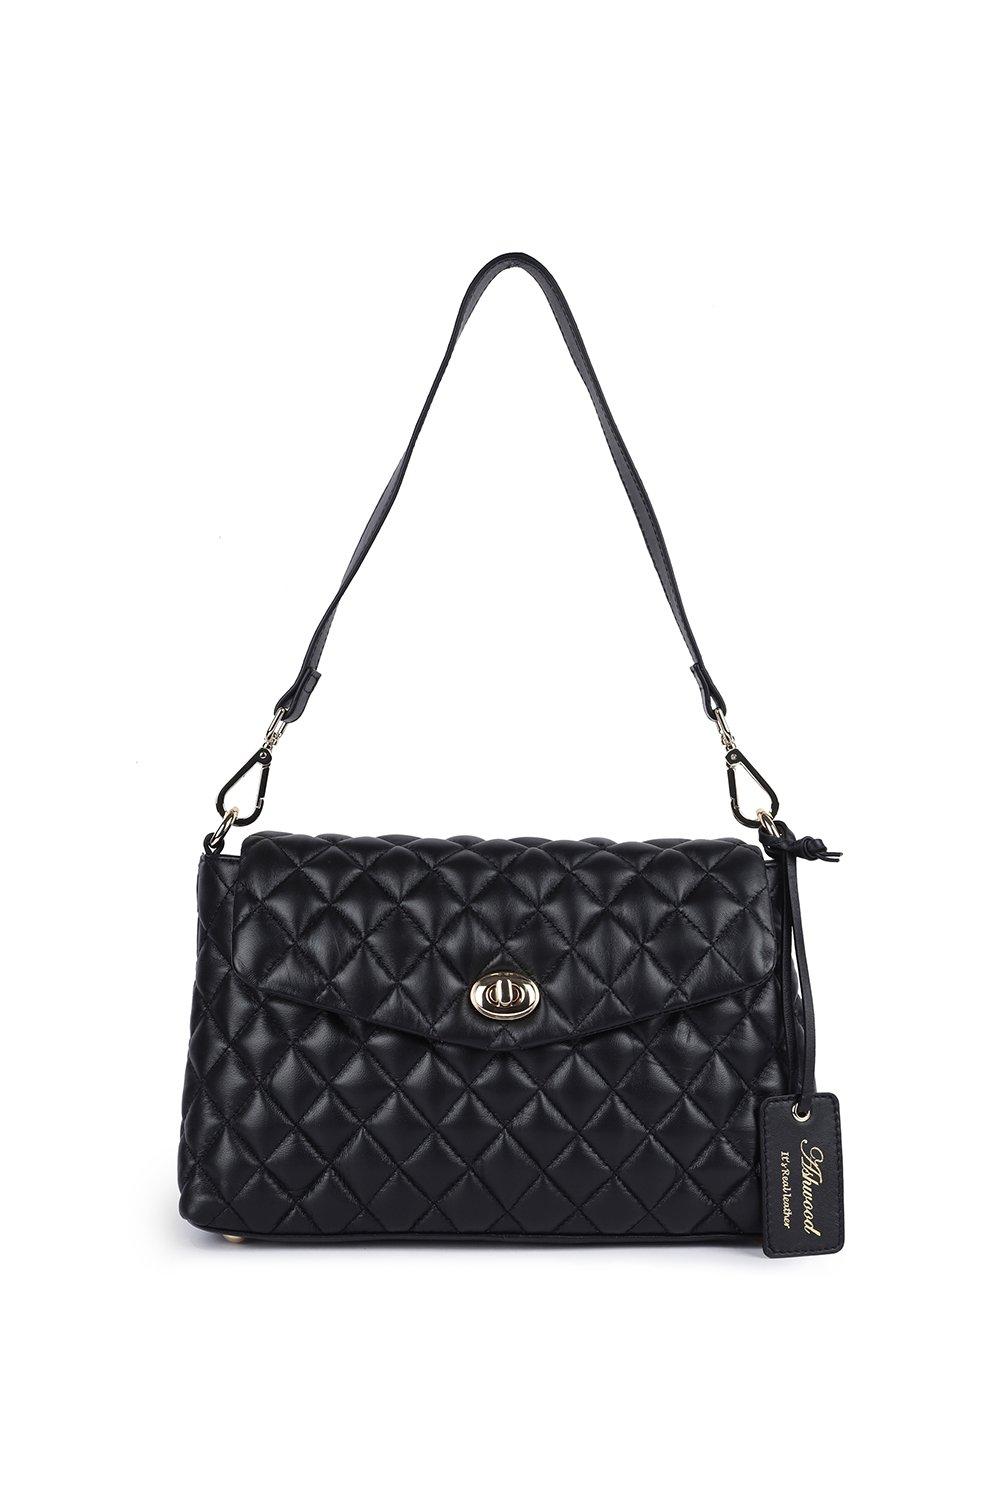 The Symmetrical | Quilted Leather Bag with Chain | Black Quilted Purse  Shoulder - ClutchToteBags.com